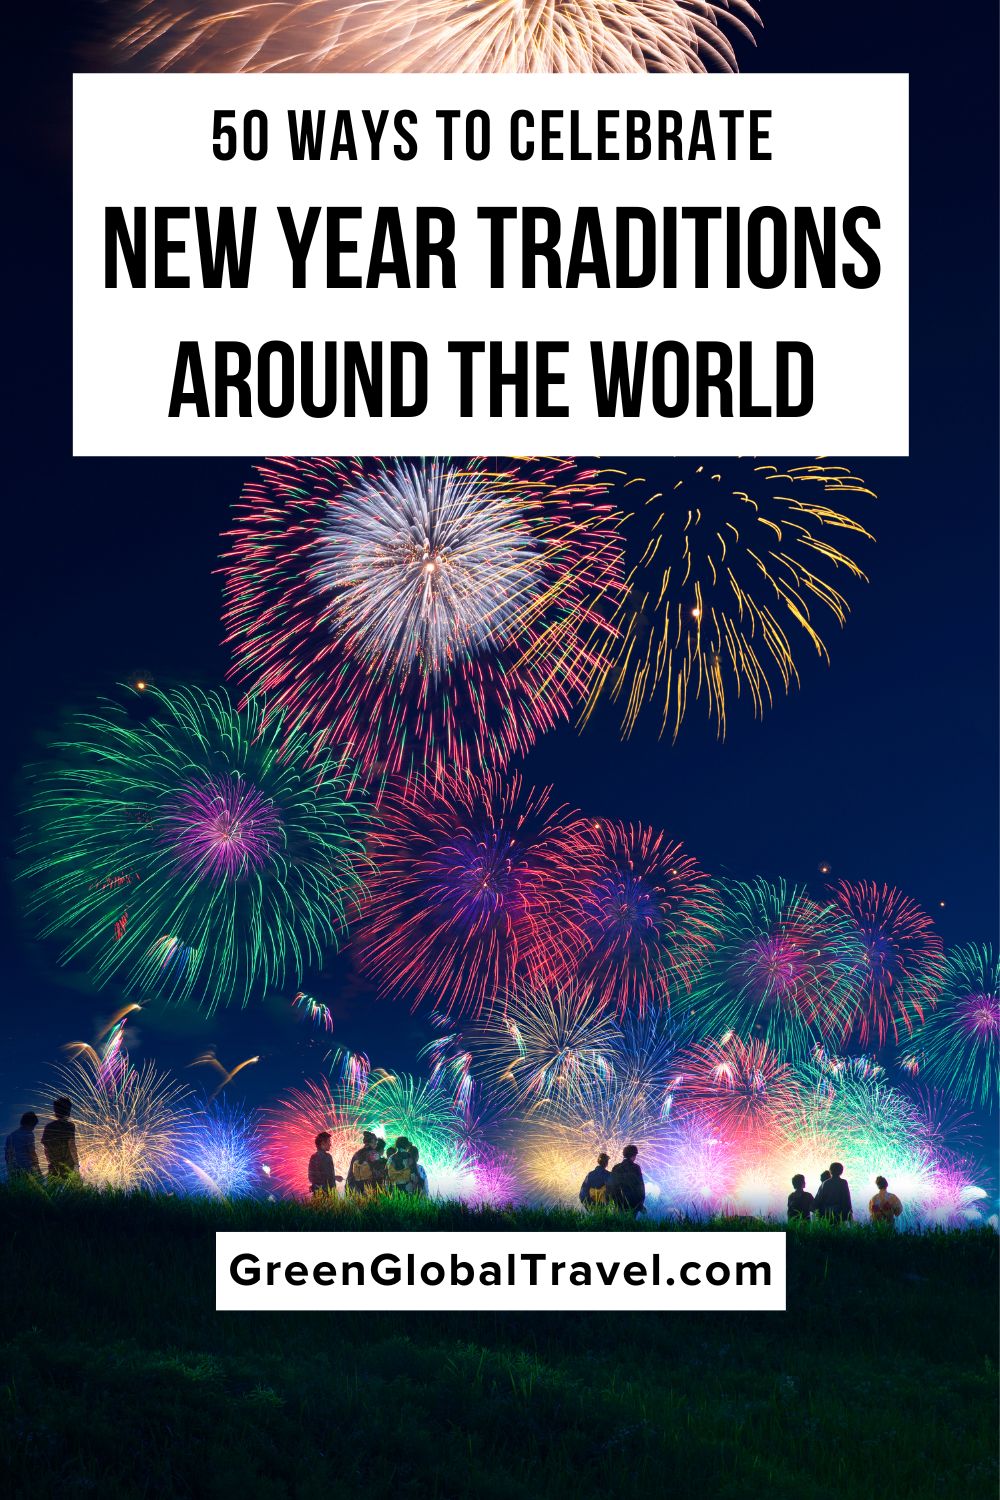 50 Ways to Celebrate New Year Traditions Around the World including New Year's Eve Food Traditions, New Year's Good Luck Traditions, New Year's Festivals, How to celebrate the New Year at Home, New Year's Clothing, New Year's Eve Traditions Around the World and more! new year wishes | new year's day food | new years eve food traditions | new year's eve traditions | new year good luck traditions | new year's food traditions around the world | new year customs | new years superstition